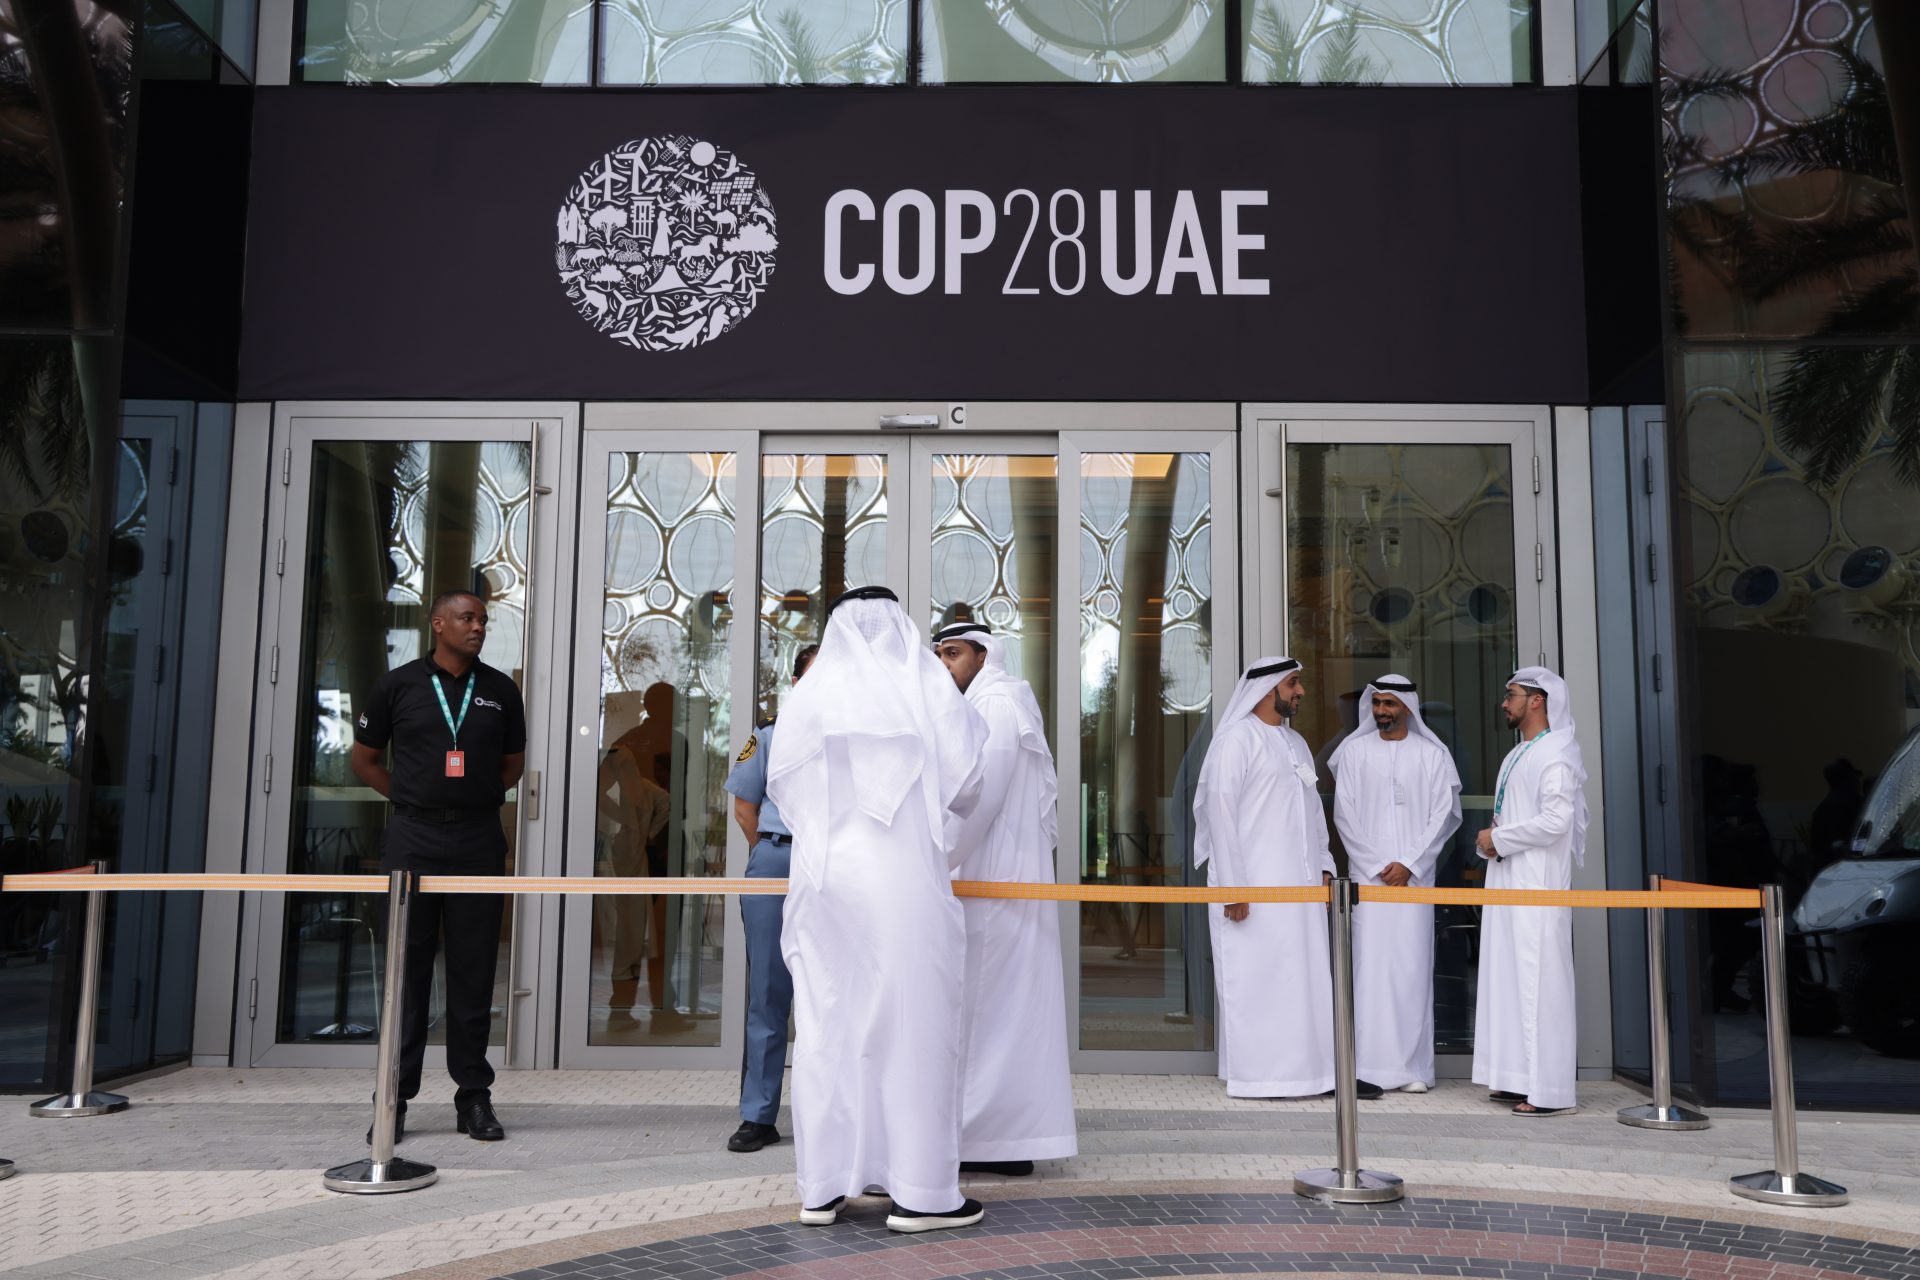 COP28: UAE accused of using UN climate summit to make backroom oil deals